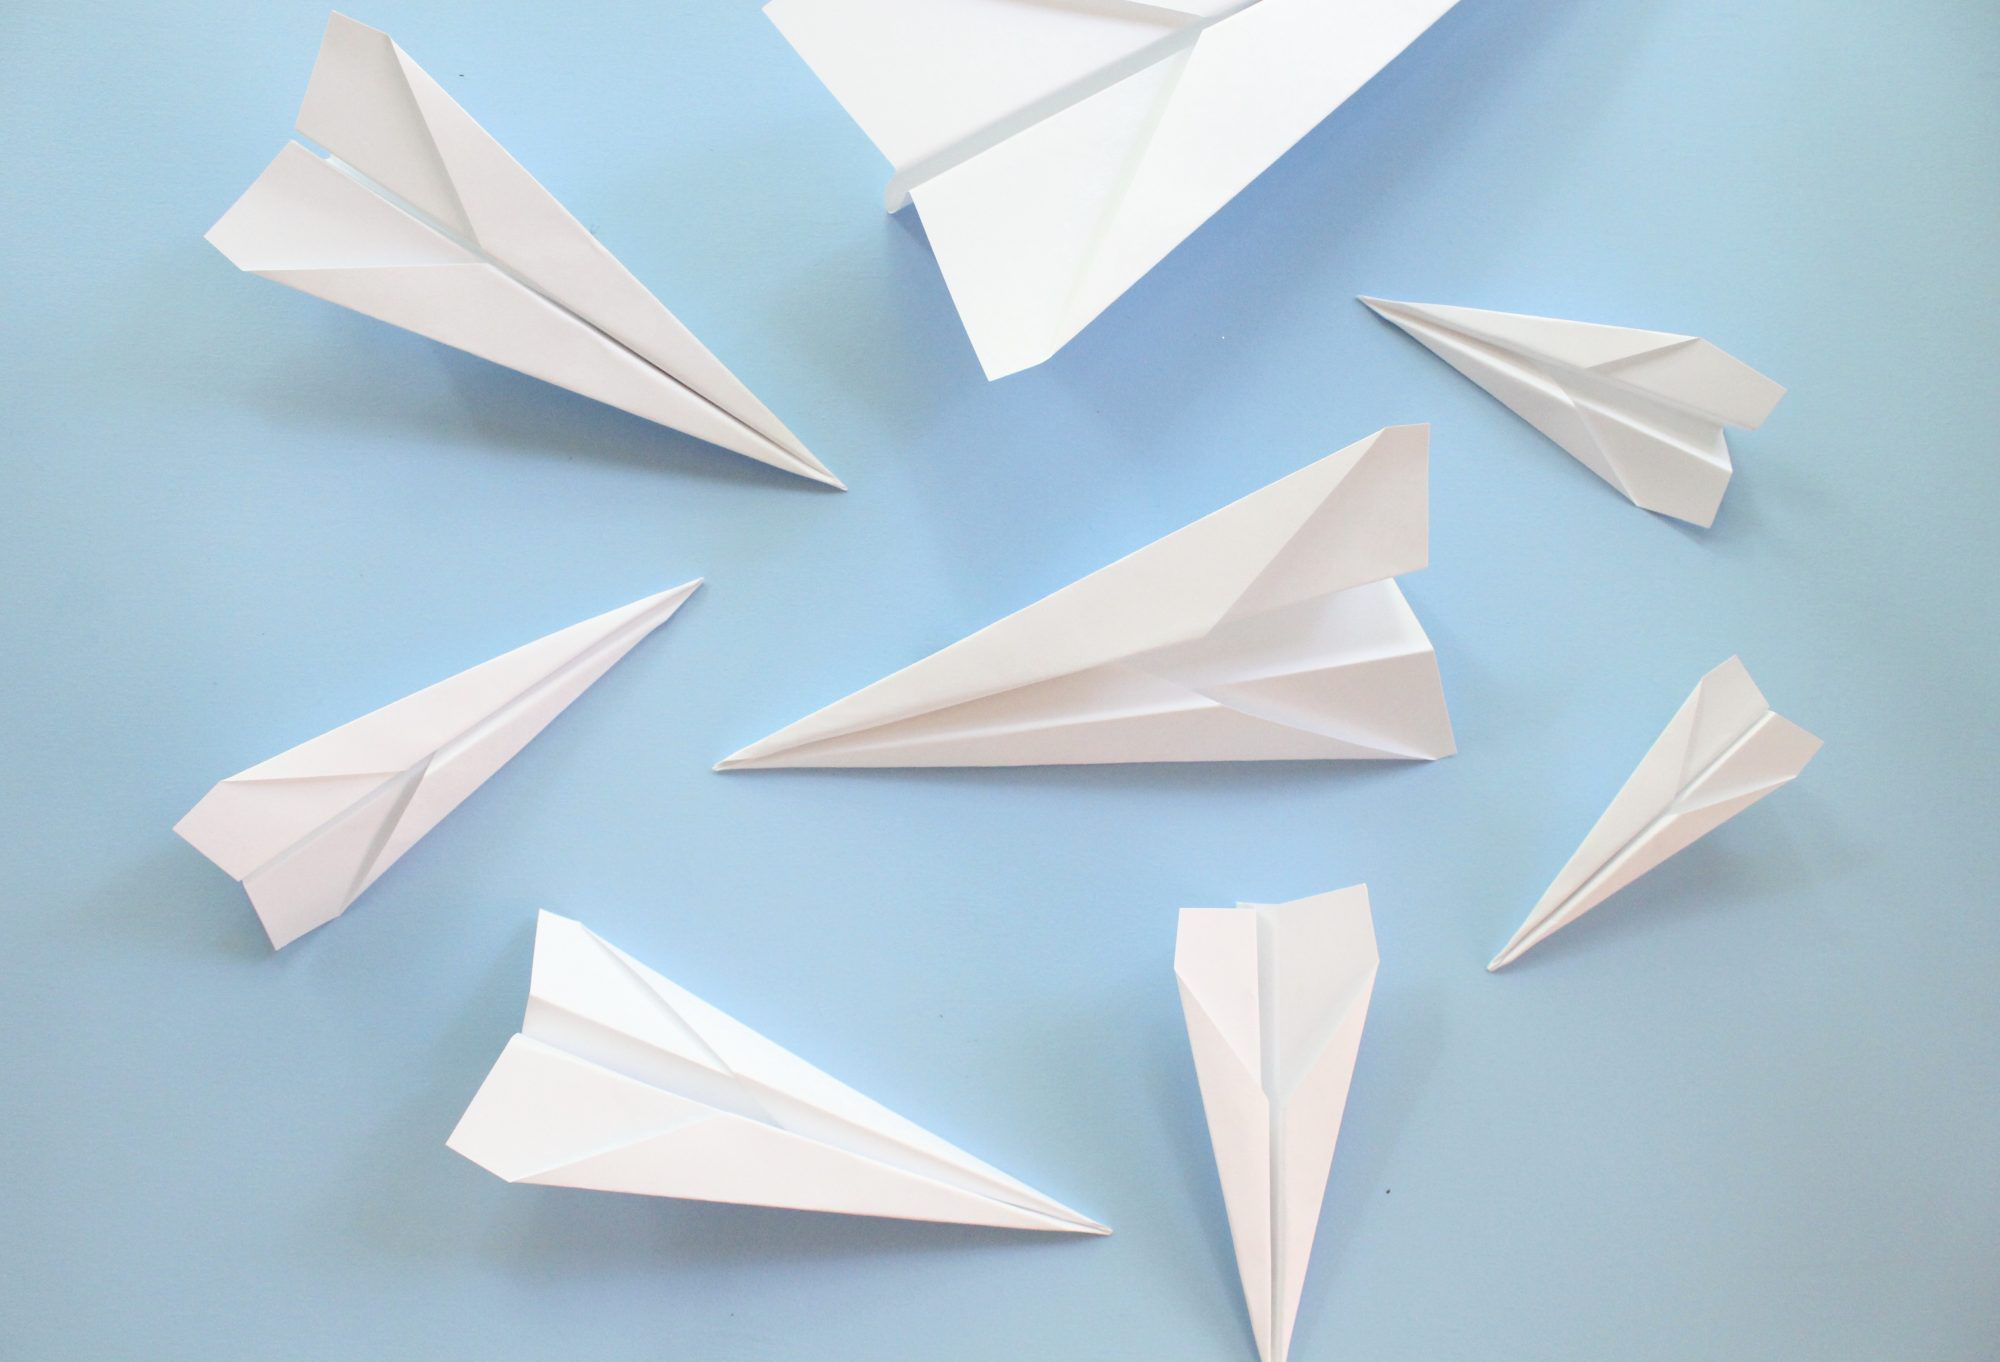 Various sized paper airplanes on a blue background